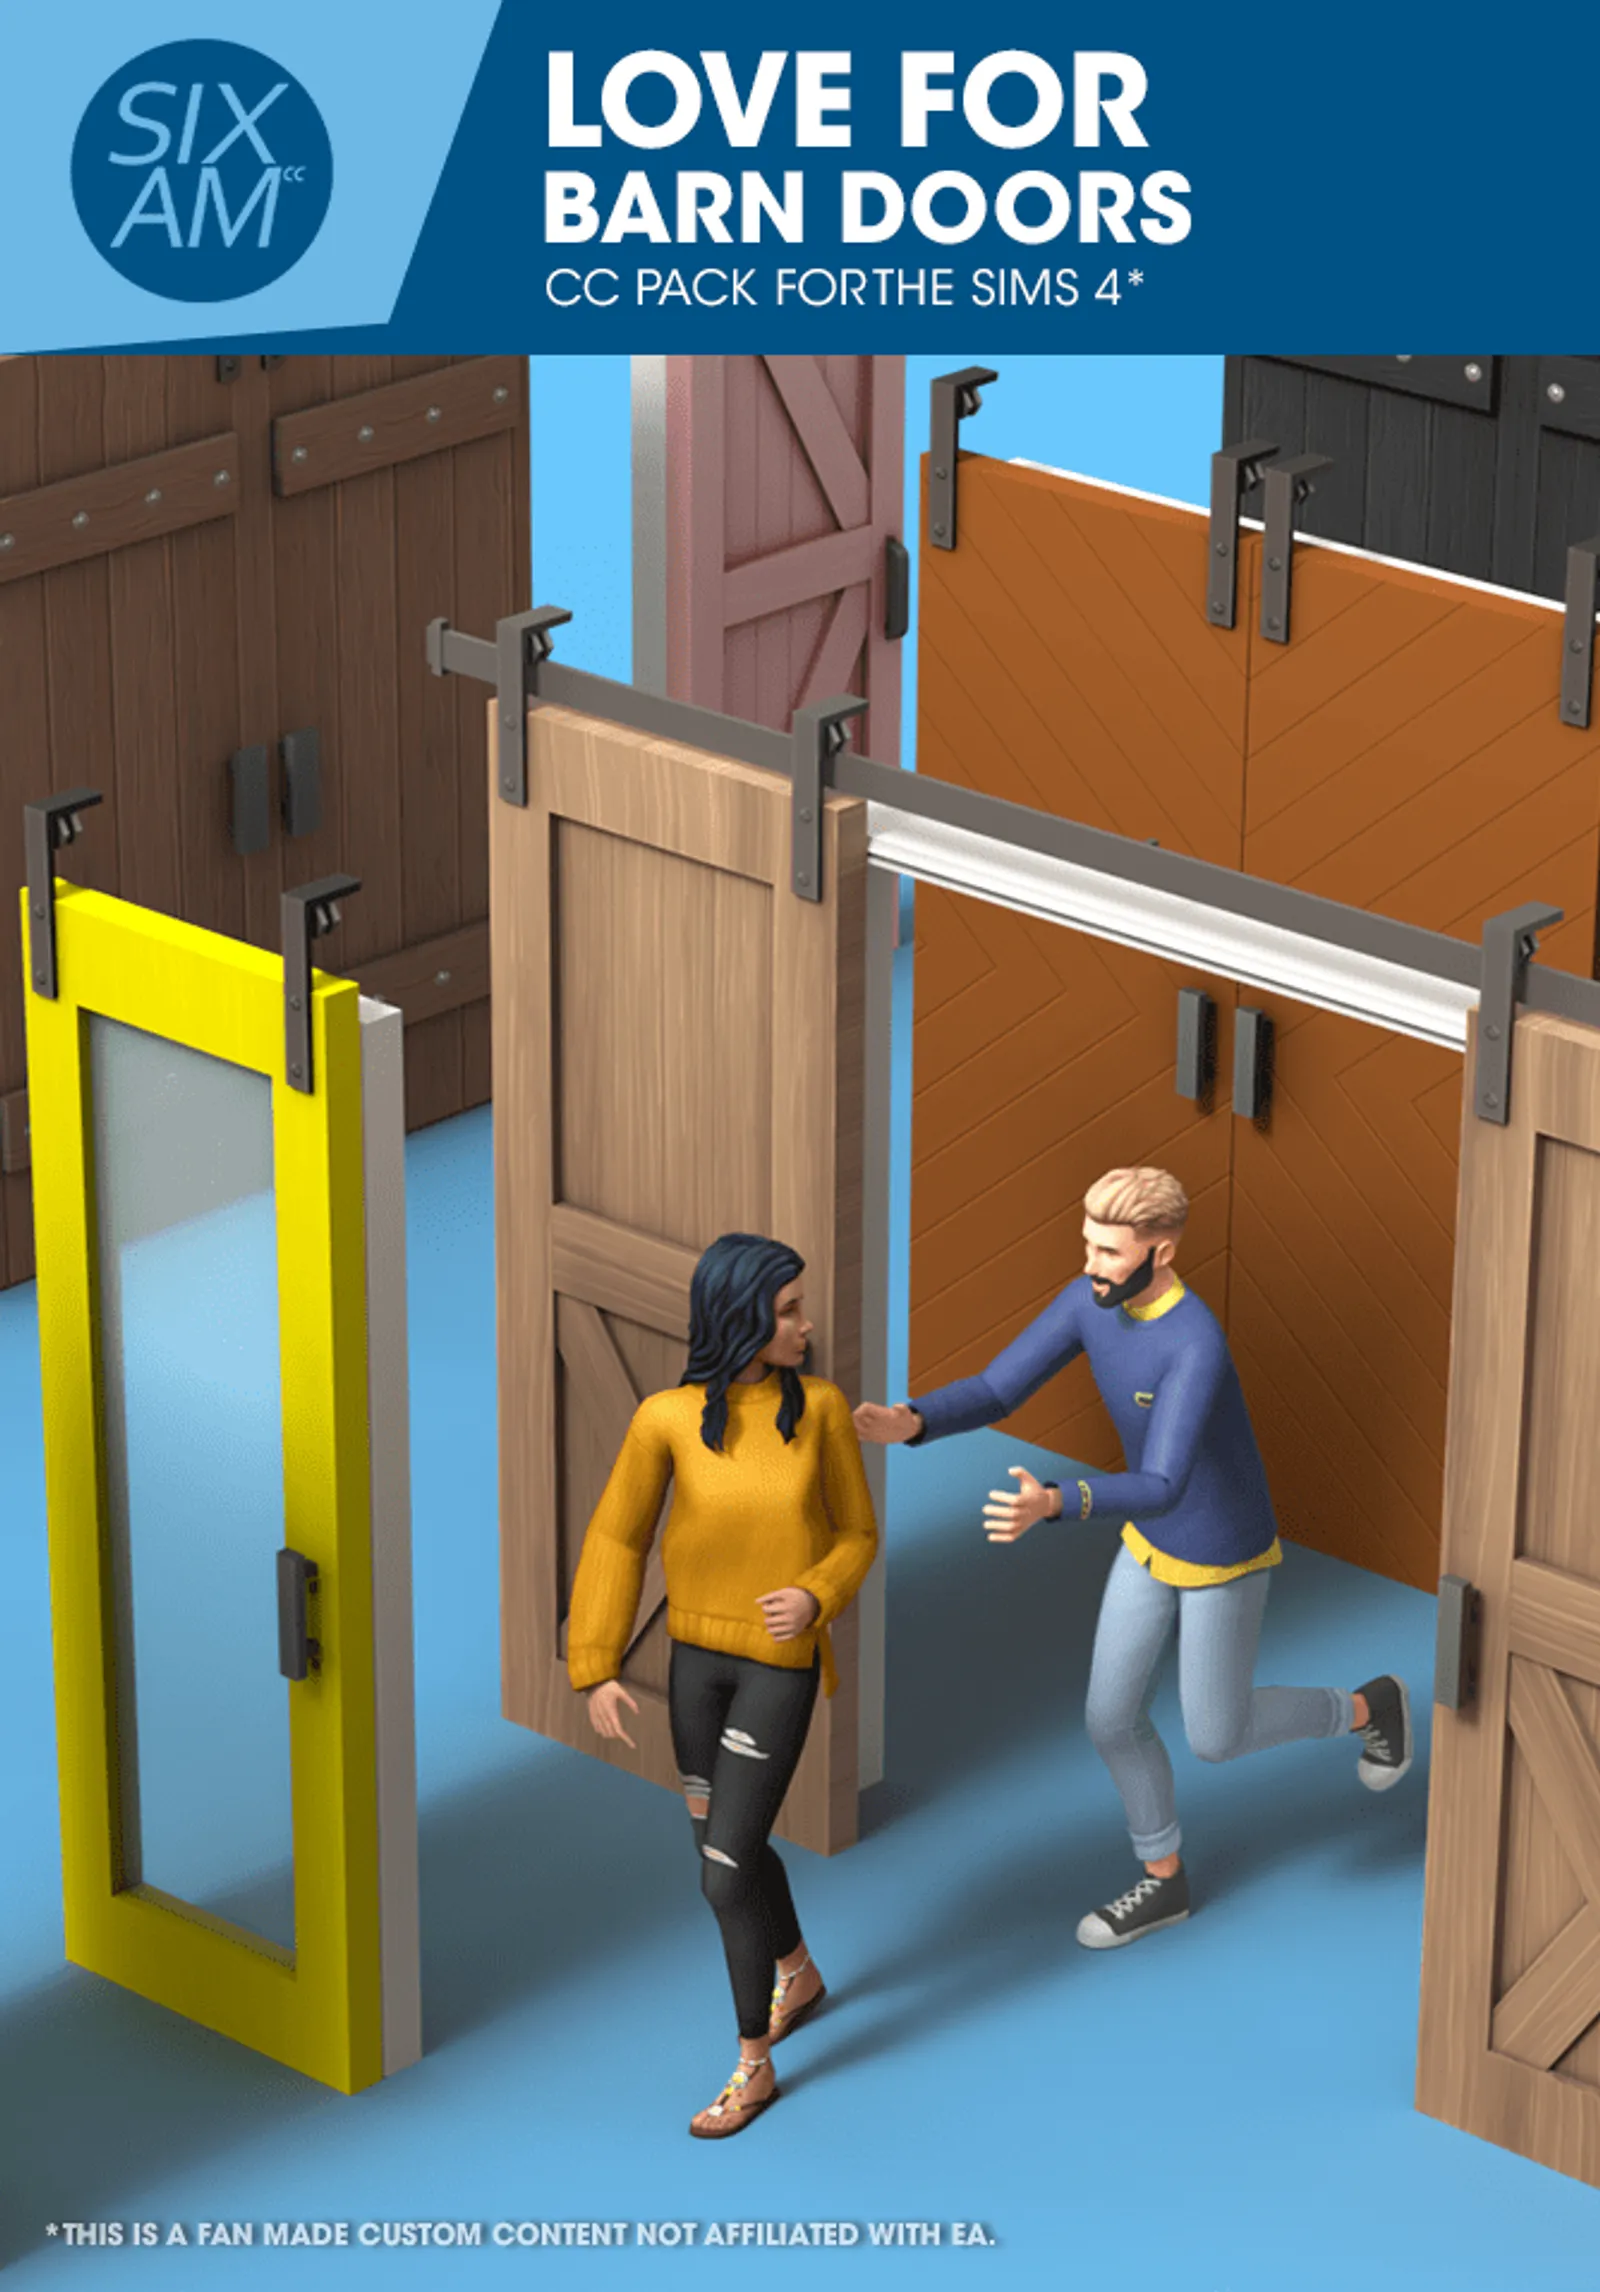 Love for Barn Doors (CC Pack for The Sims 4)